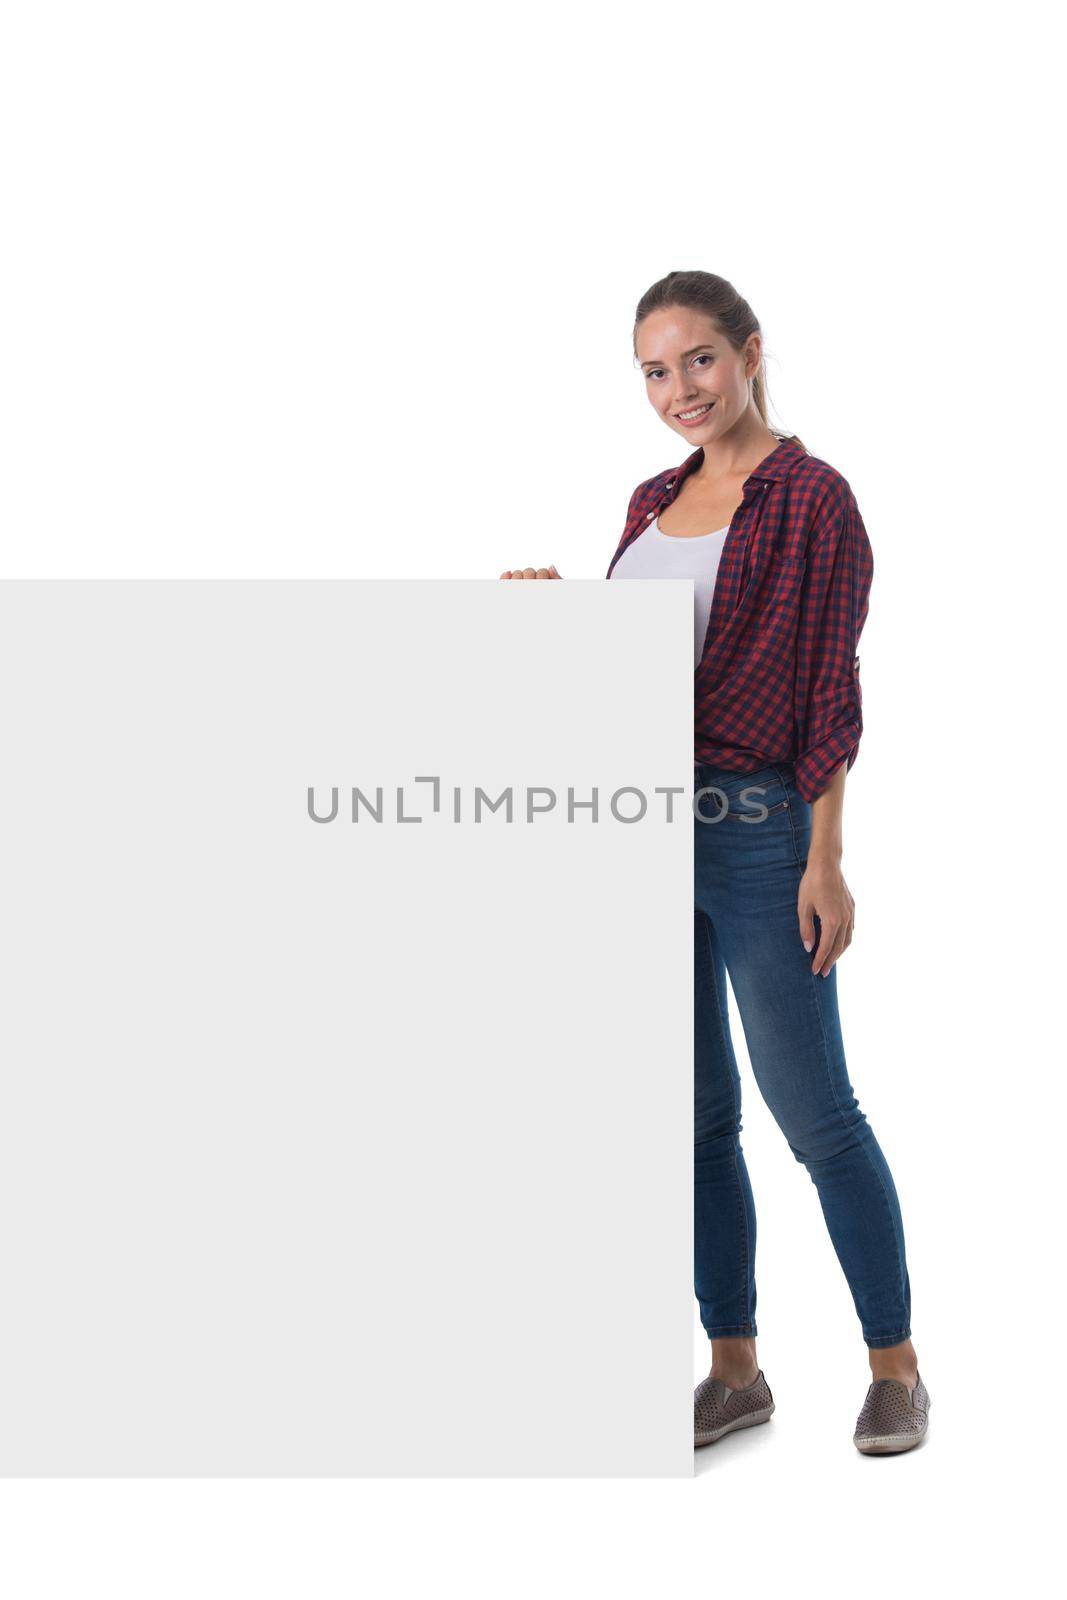 Young beautiful woman smiling showing blank white placard billboard sign. Casual caucasian female model with friendly smile. Isolated on white background